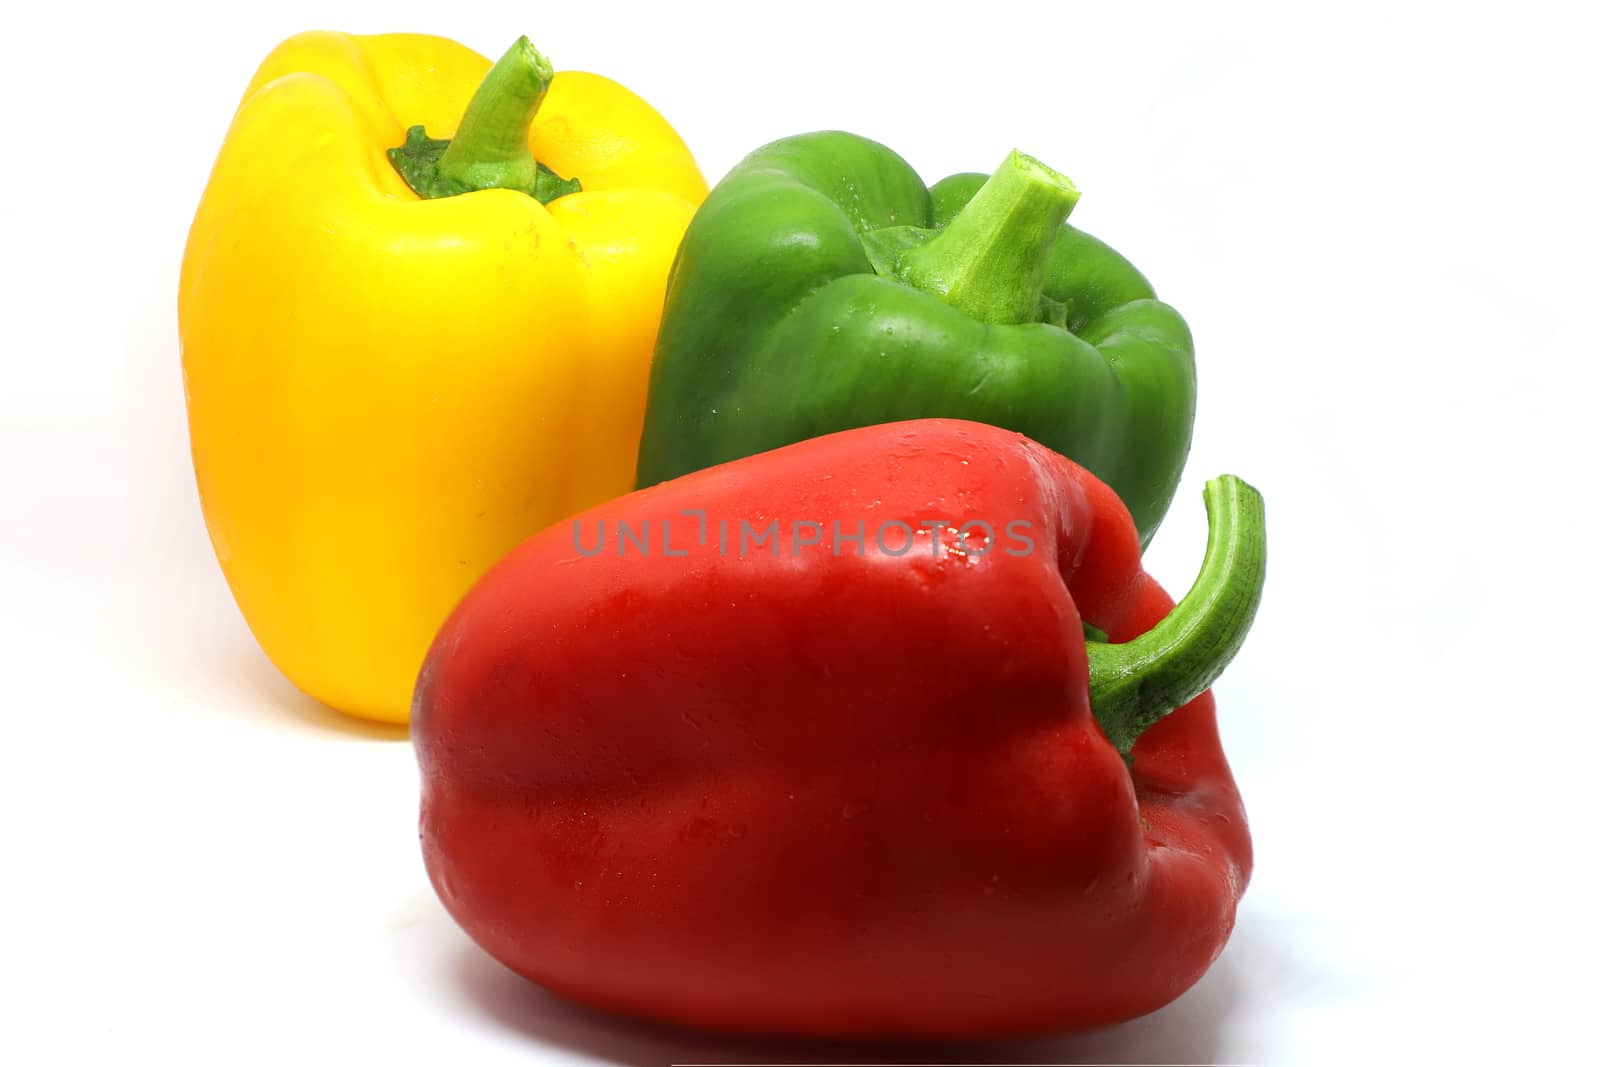 red, gree, and yellow bell pepper isolated on white background